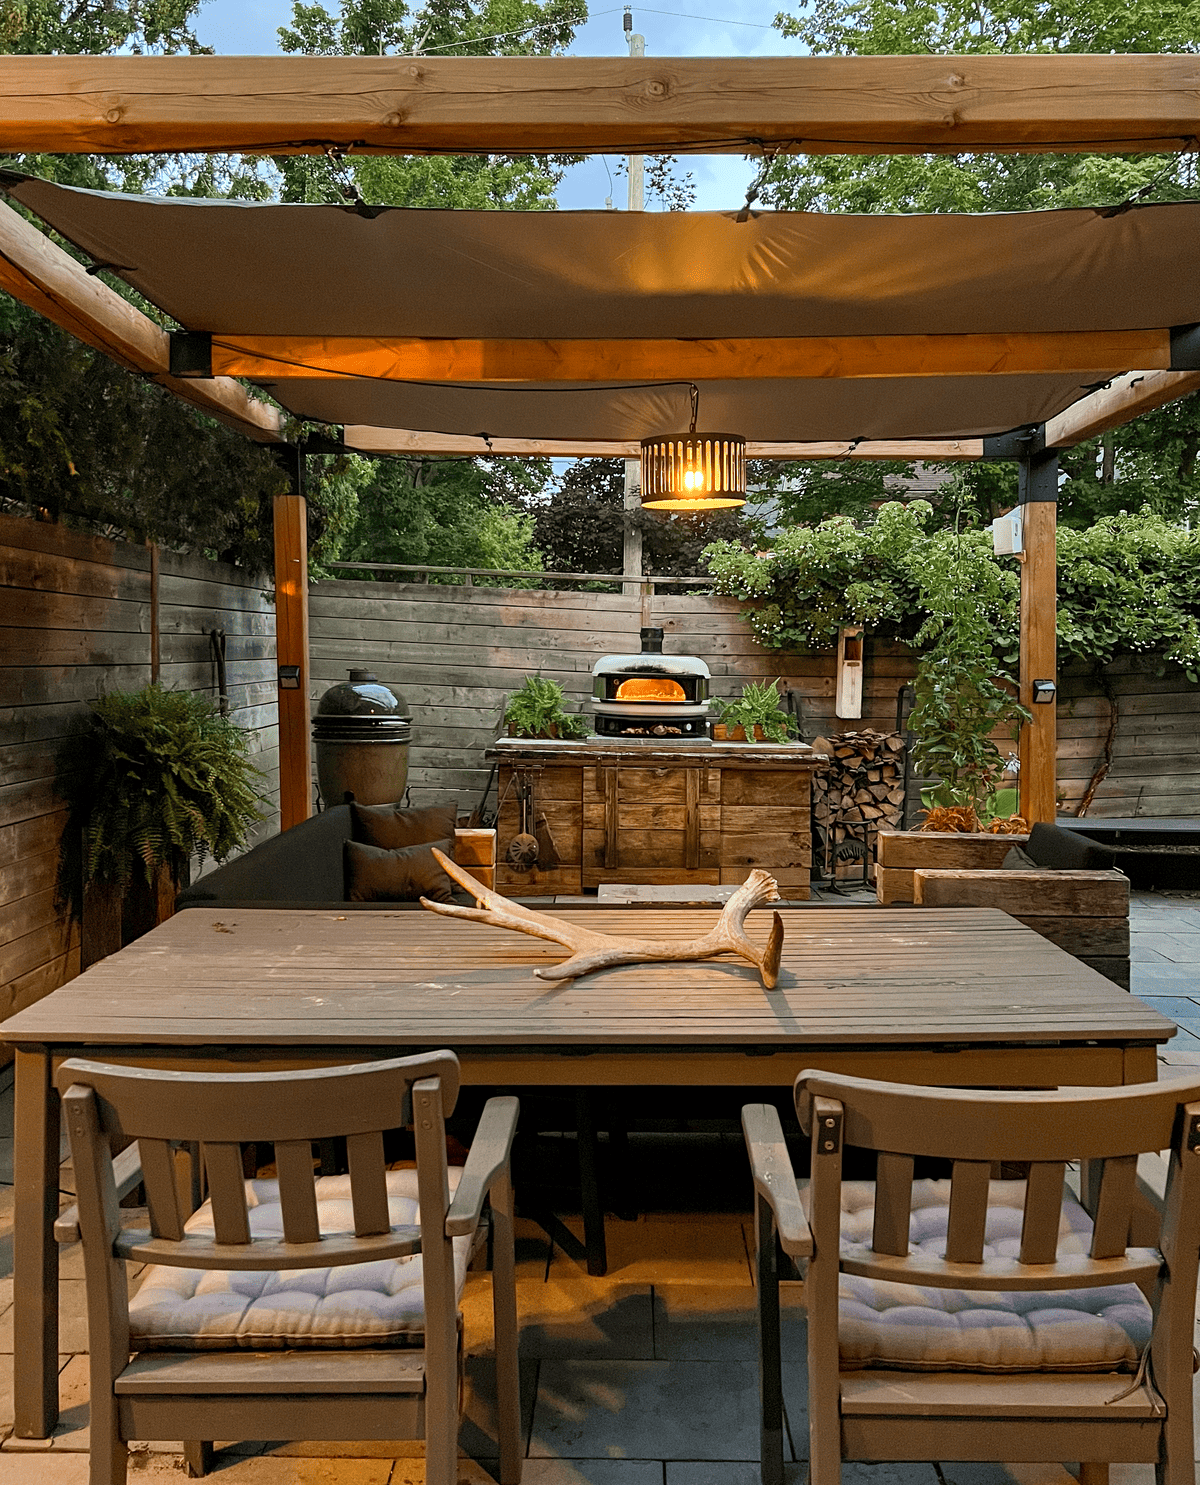 Outdoor dining area with pergola and pizza oven.